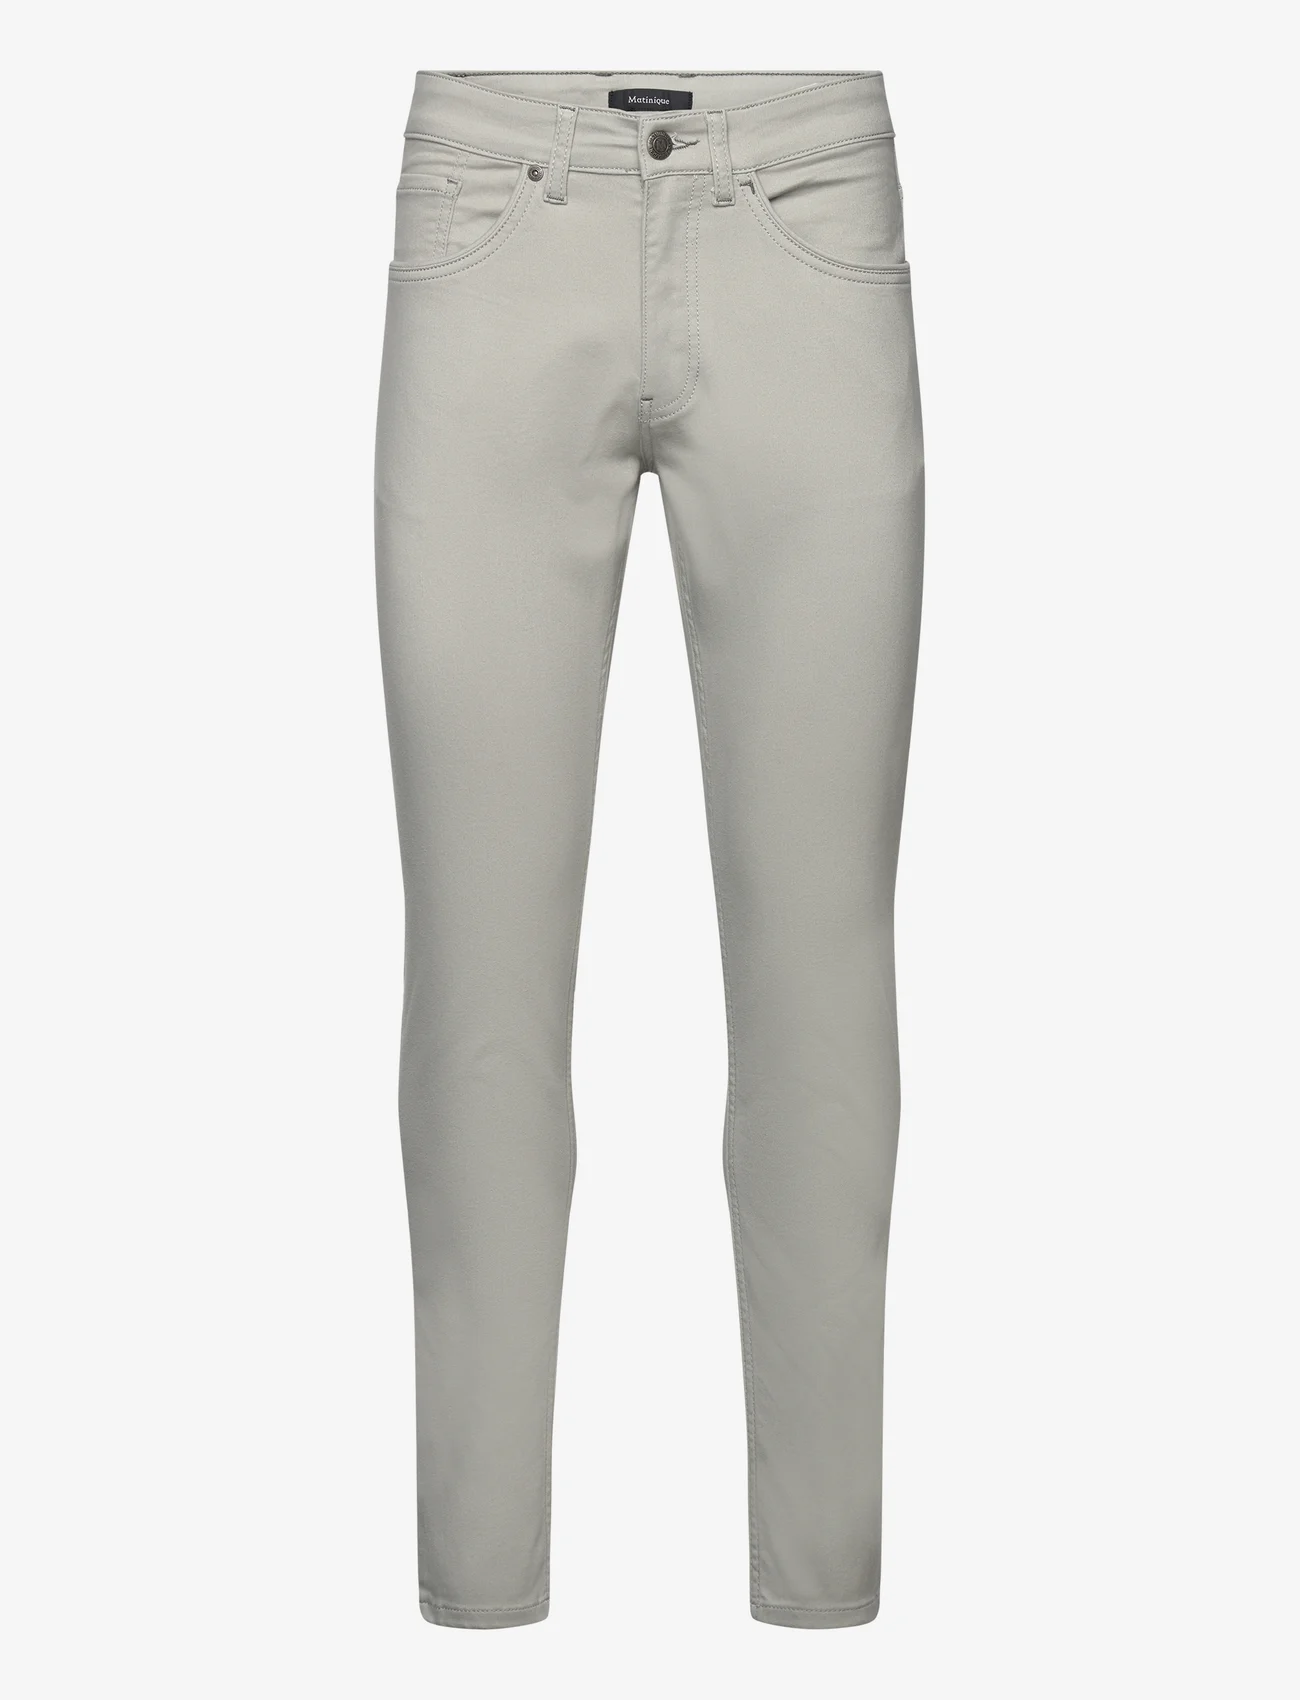 Matinique - MApete - slim jeans - ghost gray - 0